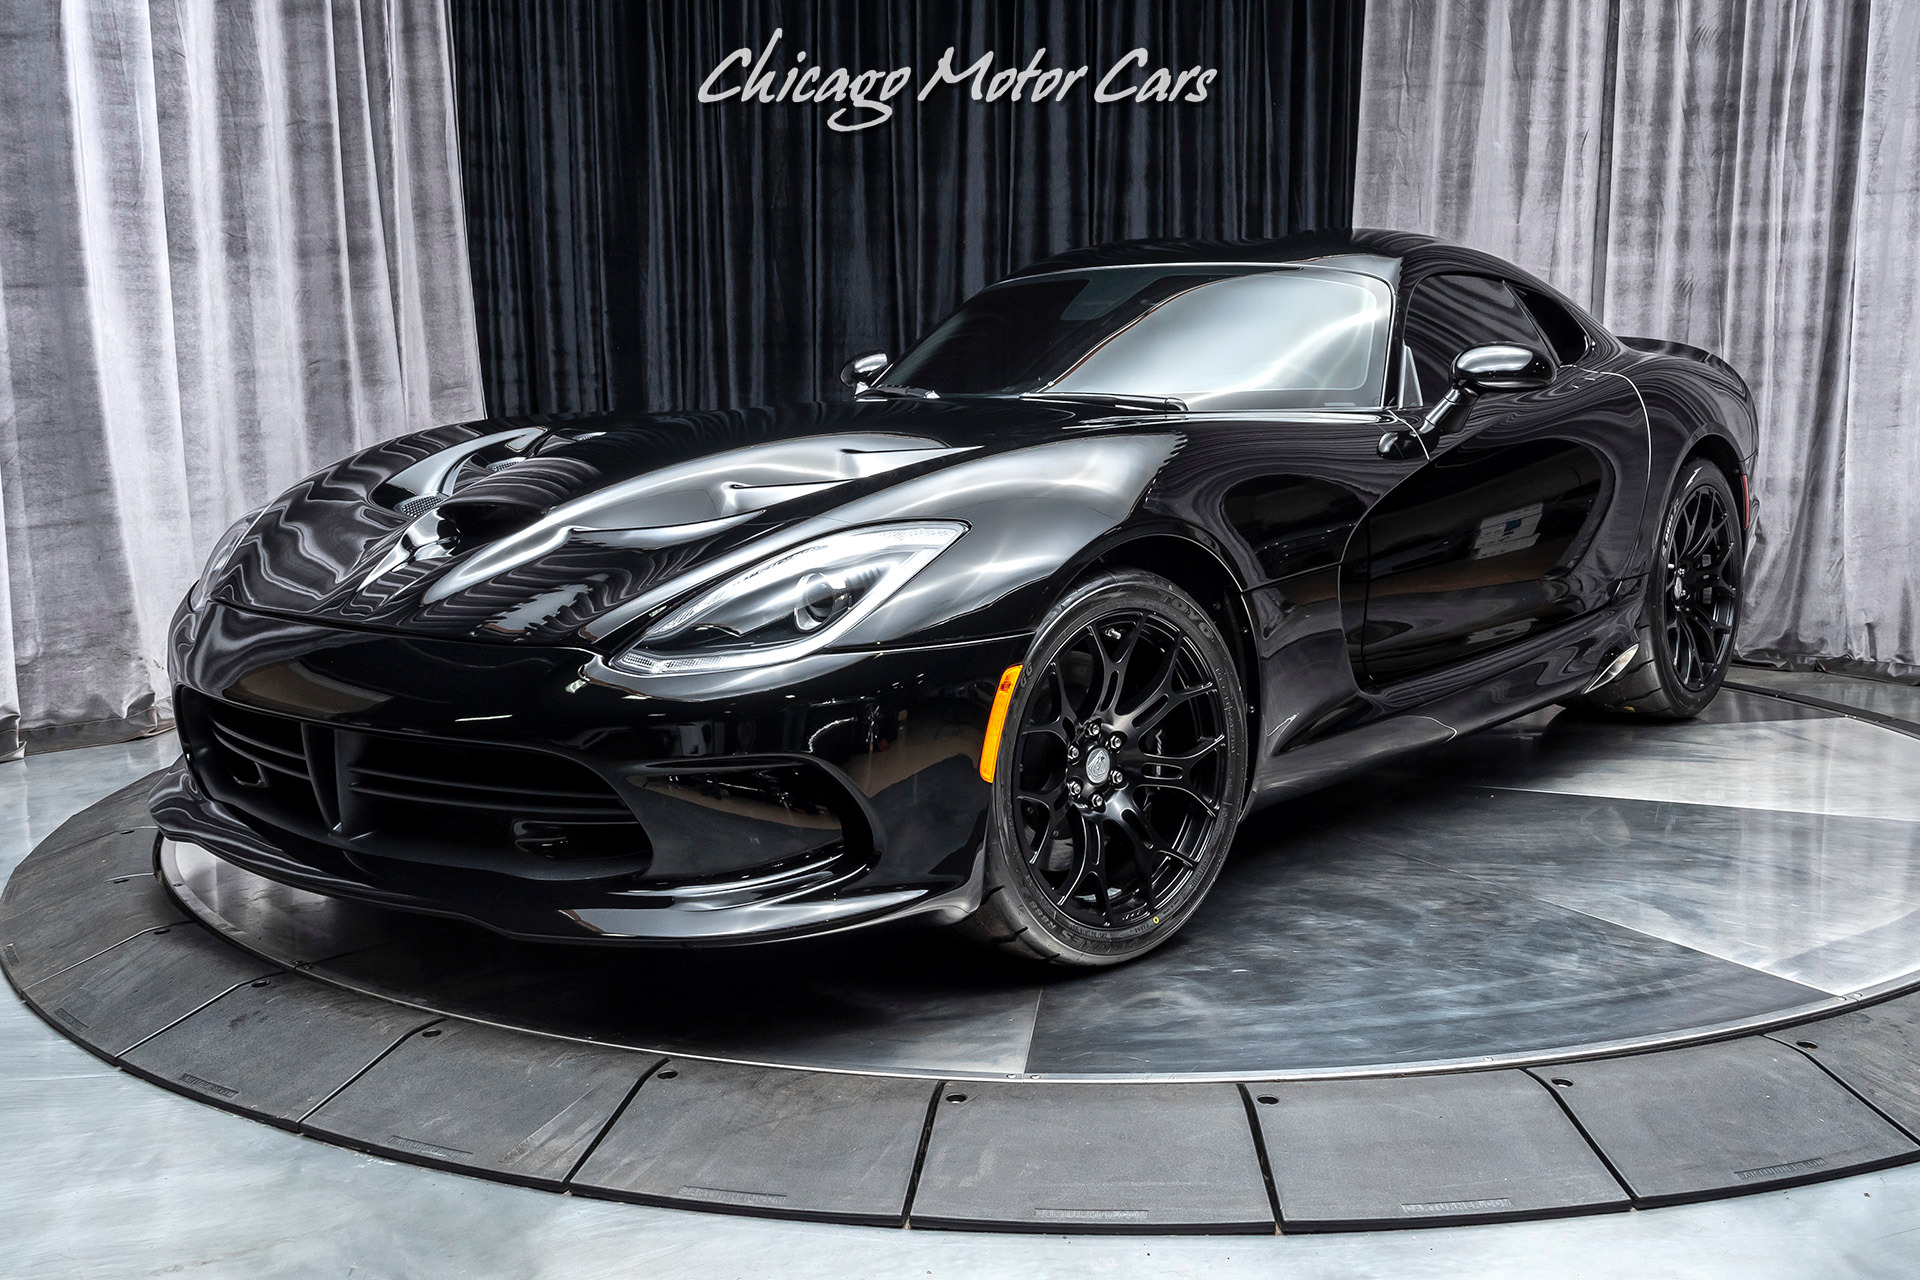 Used-2013-Dodge-SRT-Viper-Coupe-GRAND-TOURING-PACKAGE-SABELT-SEATS-UPGRADES